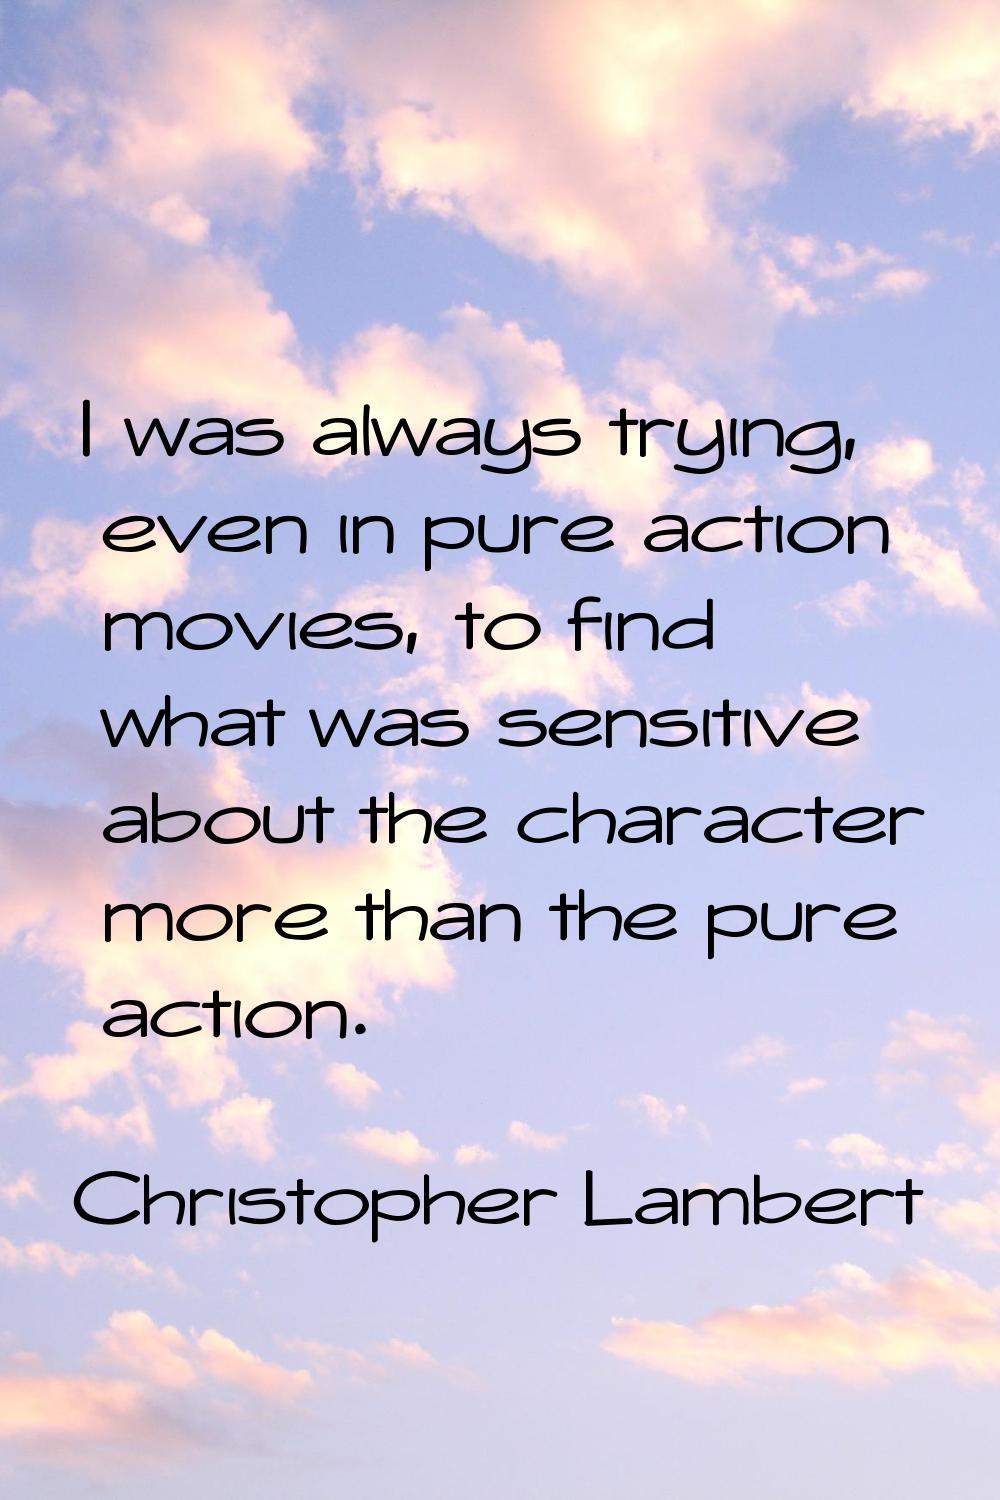 I was always trying, even in pure action movies, to find what was sensitive about the character mor